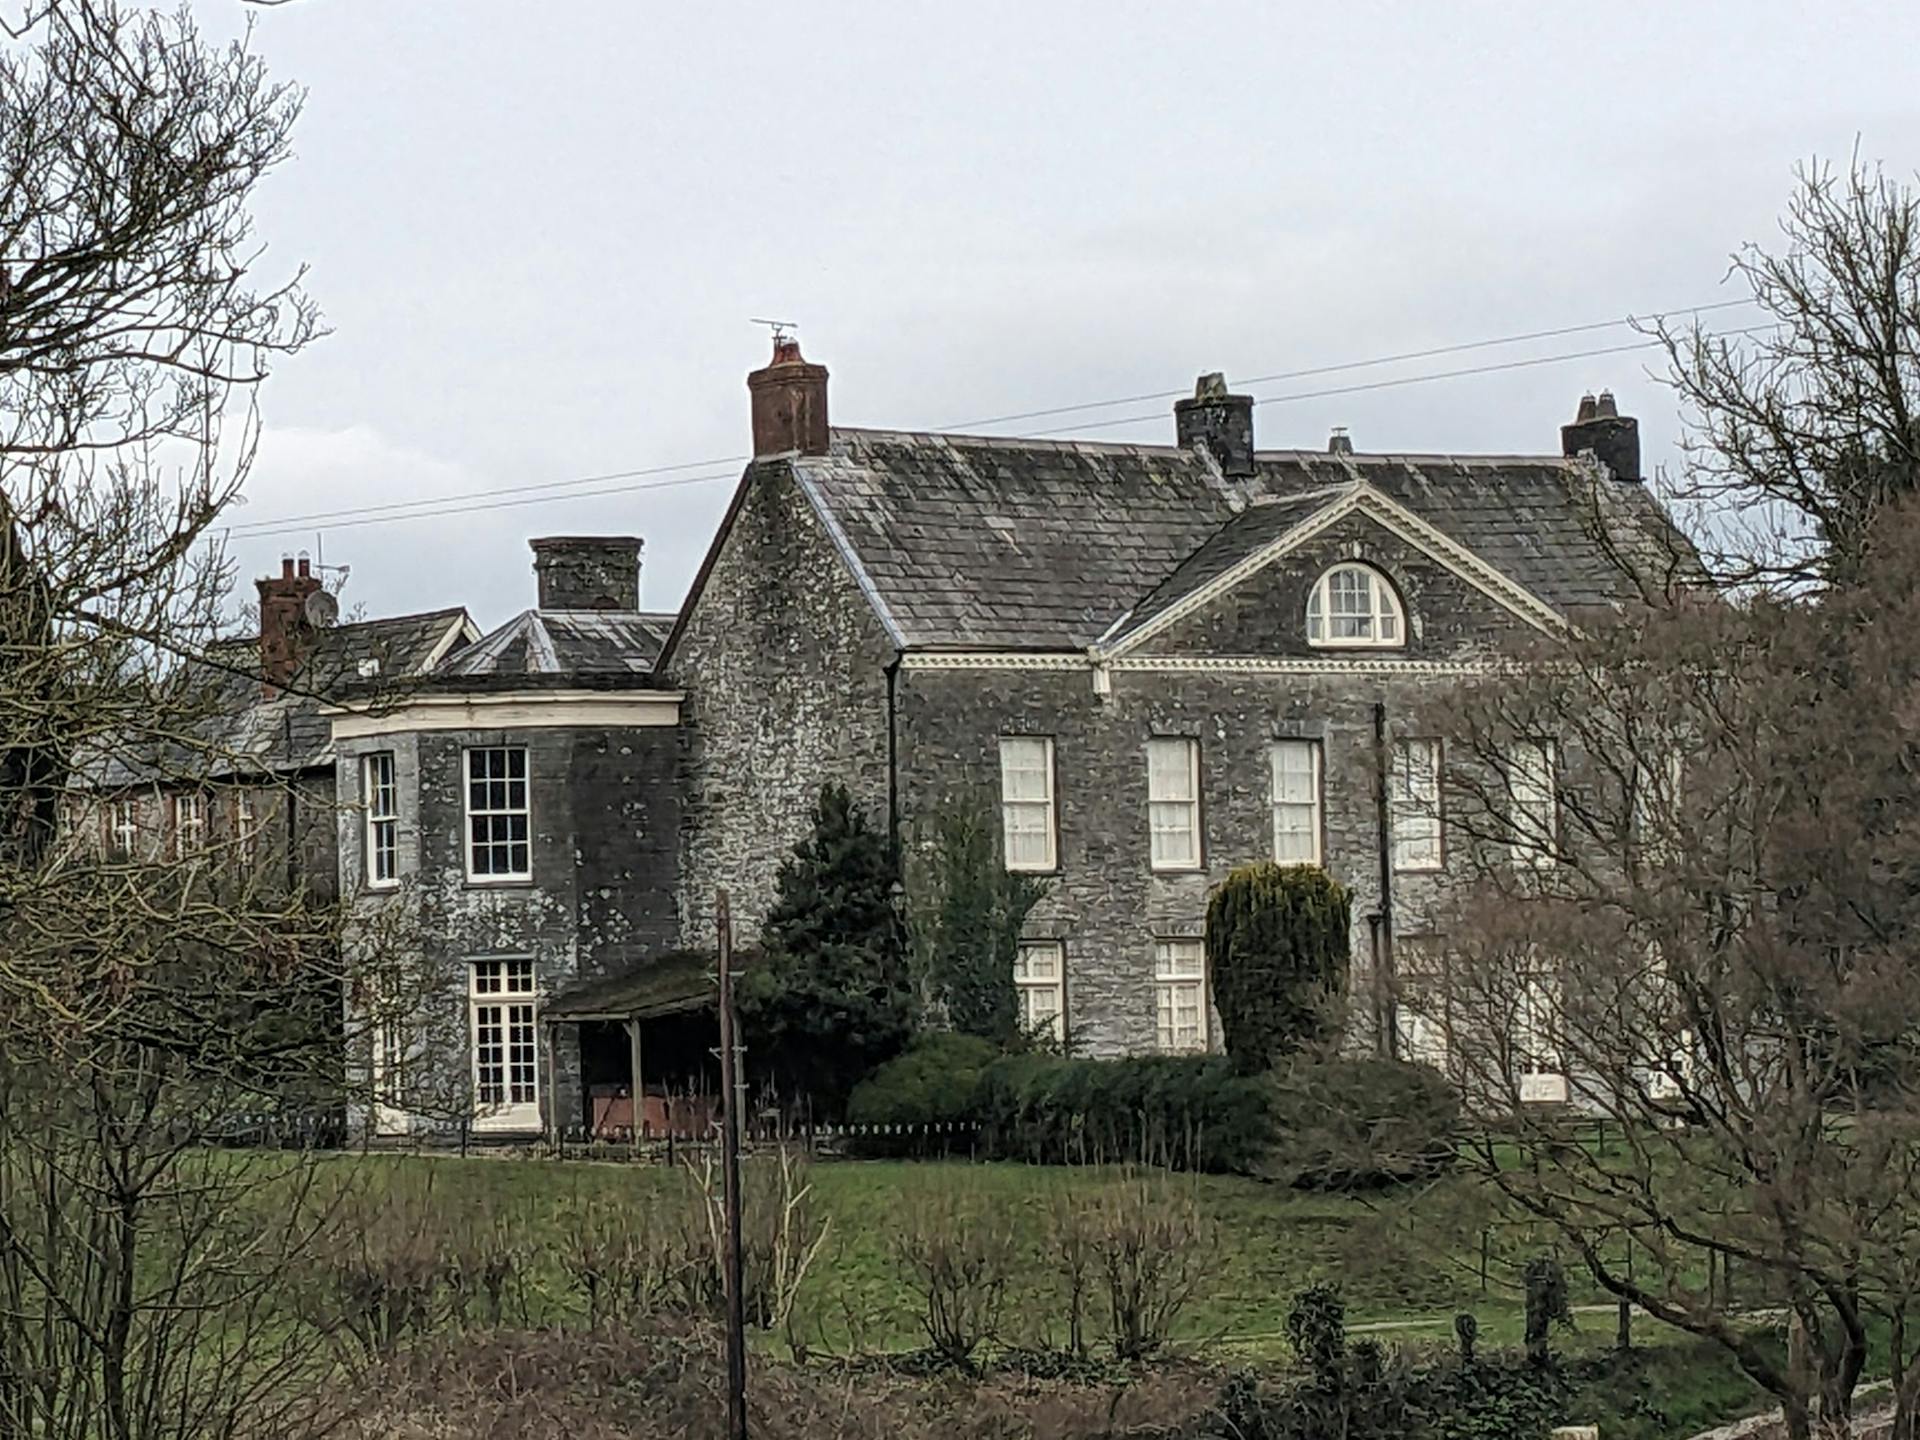 <p>Blaenpant Mansion is a beautifully restored Georgian mansion located in Llandygwydd, Ceredigion, Wales. It offers large self-catering accommodation suitable for up to 18 people, making it ideal for large families and groups. </p><p><br></p><p>The mansion is set in its own private grounds and woodland, providing a serene and picturesque setting for guests. It features a hot tub and is centrally heated, ensuring comfort throughout the year. </p><p><br></p><p>The property is within 10 miles of the sandy beaches and coves of Ceredigion and North Pembrokeshire, and close to the Teifi Valley, known for its scenic beauty and wildlife.</p>